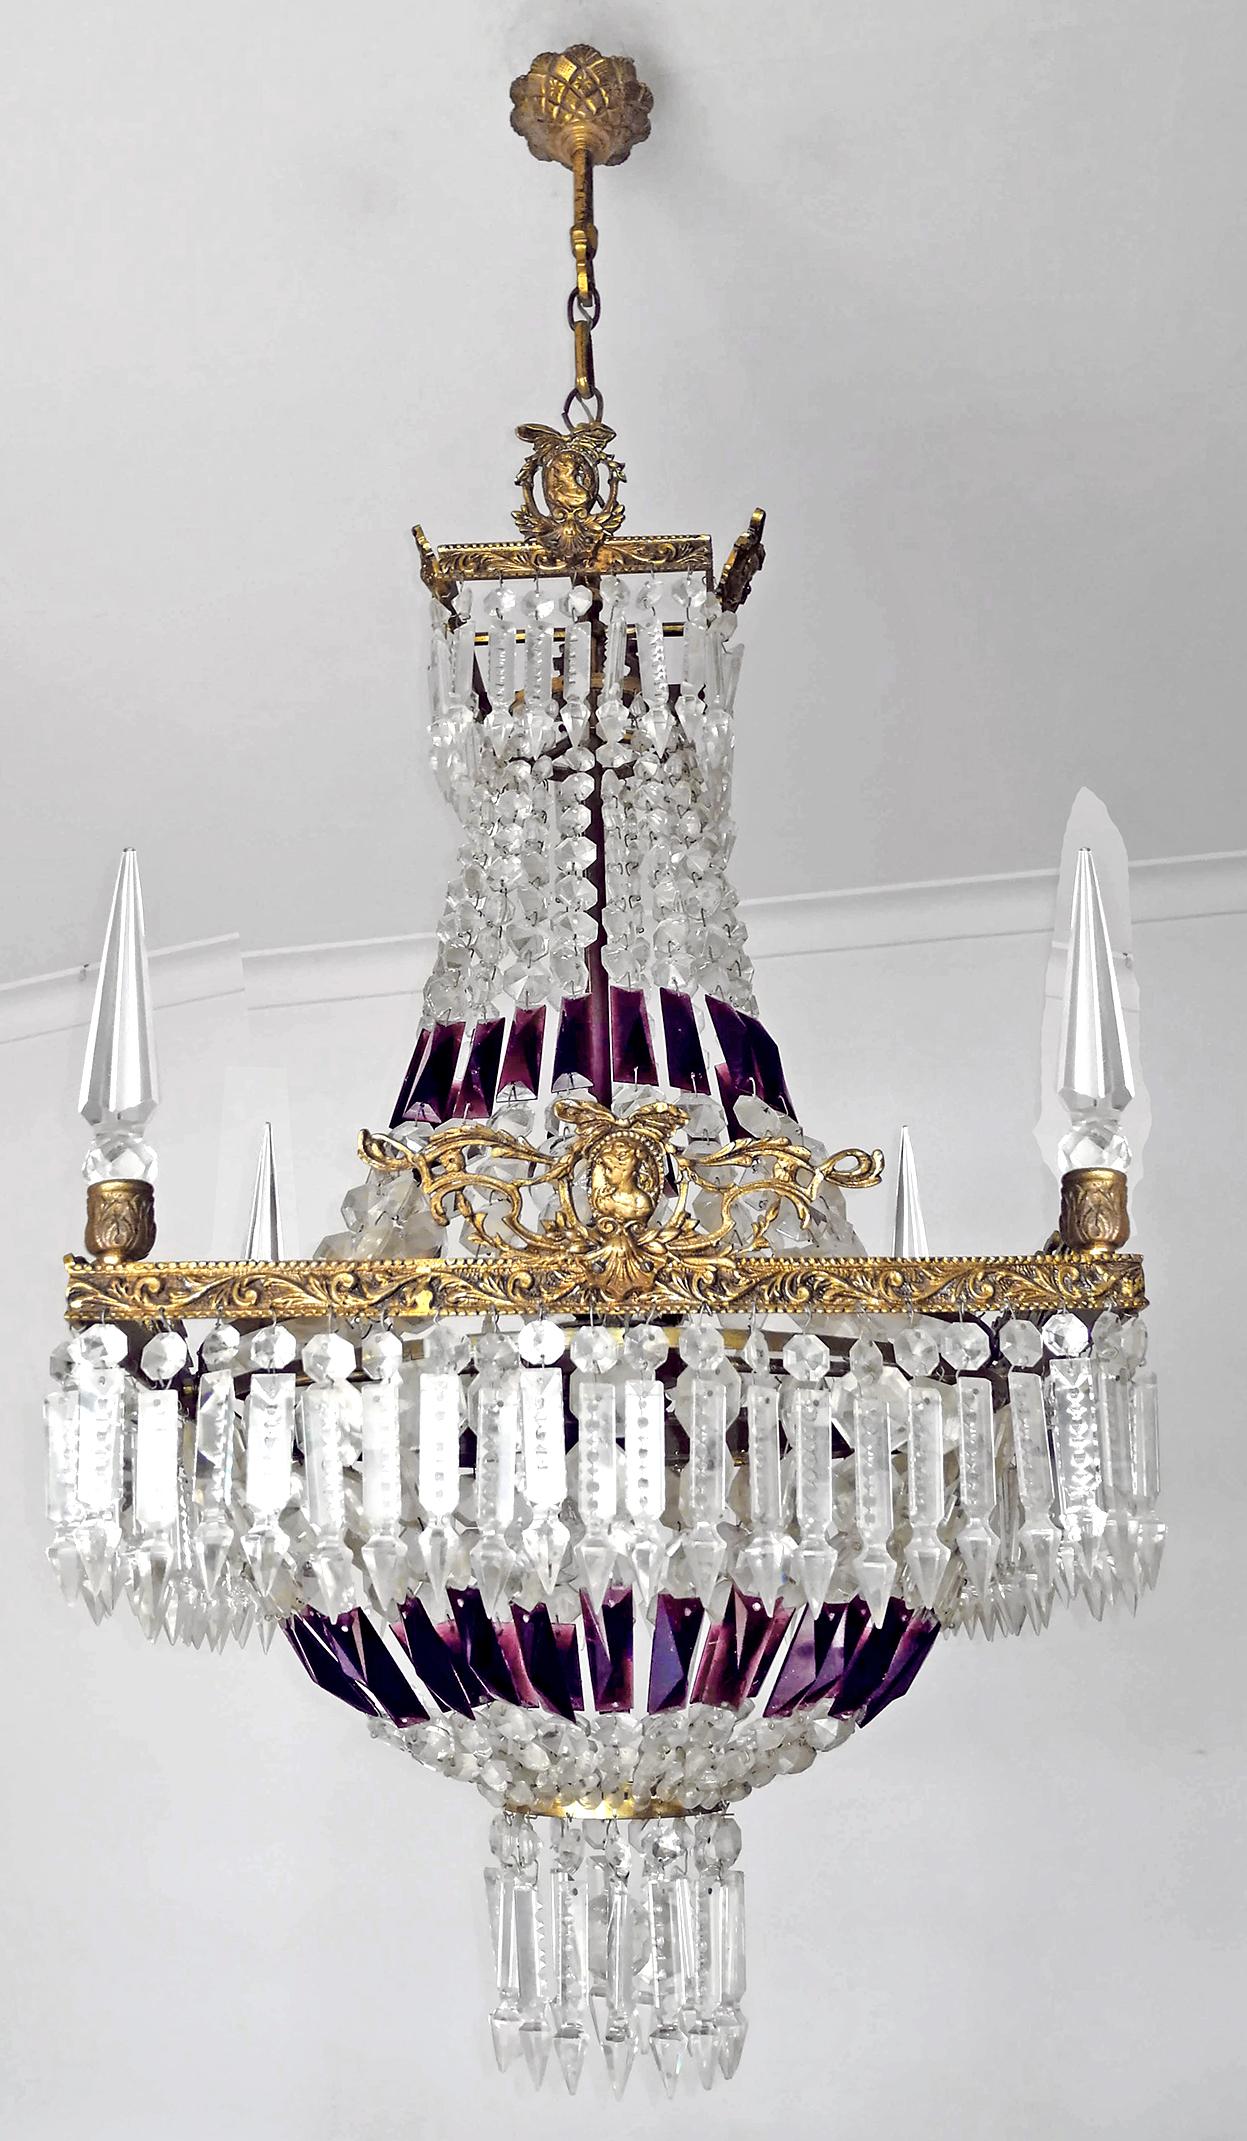 Fabulous 8-light French Empire pure crystal basket chandelier with gilt bronze frame and 4-faceted crystal obelisks, circa 1920s
Also available a pair of matching sconces.
Measures:
Depth, 16.53 in/ 42 cm
Width, 16.53 in/ 42 cm
Diagonal: 23.6 in/ 60